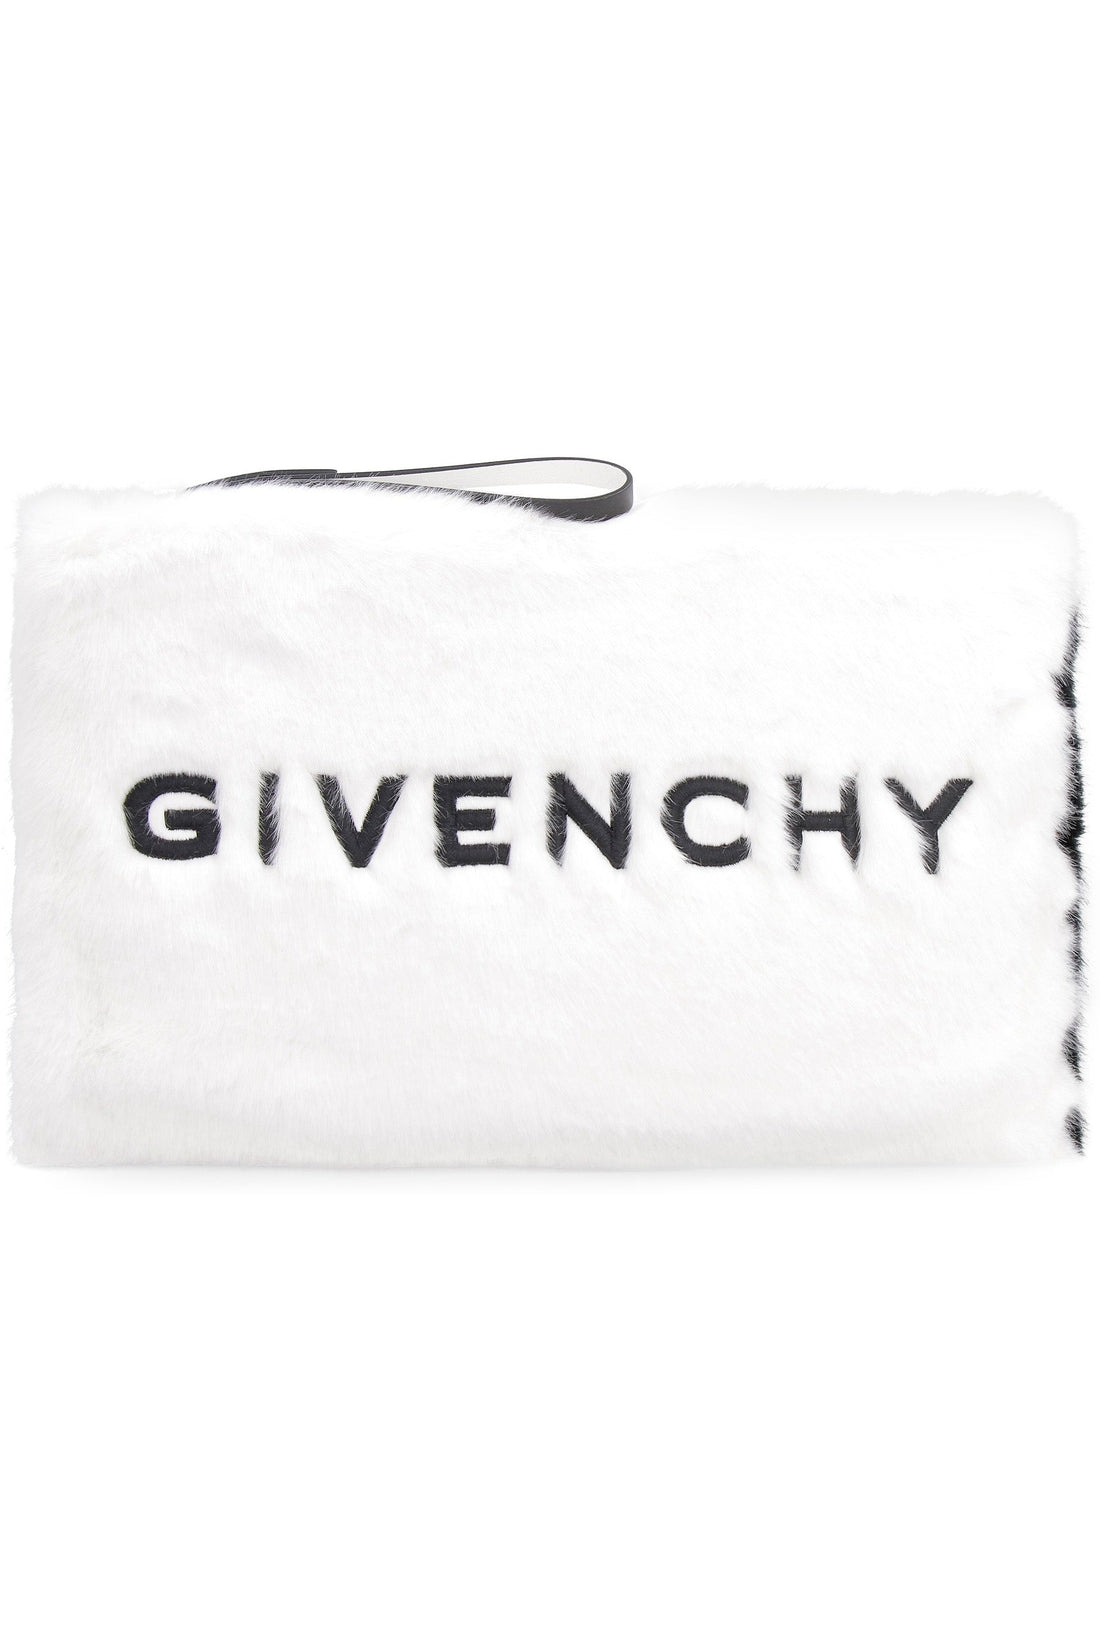 Givenchy-OUTLET-SALE-Clutch with logo-ARCHIVIST